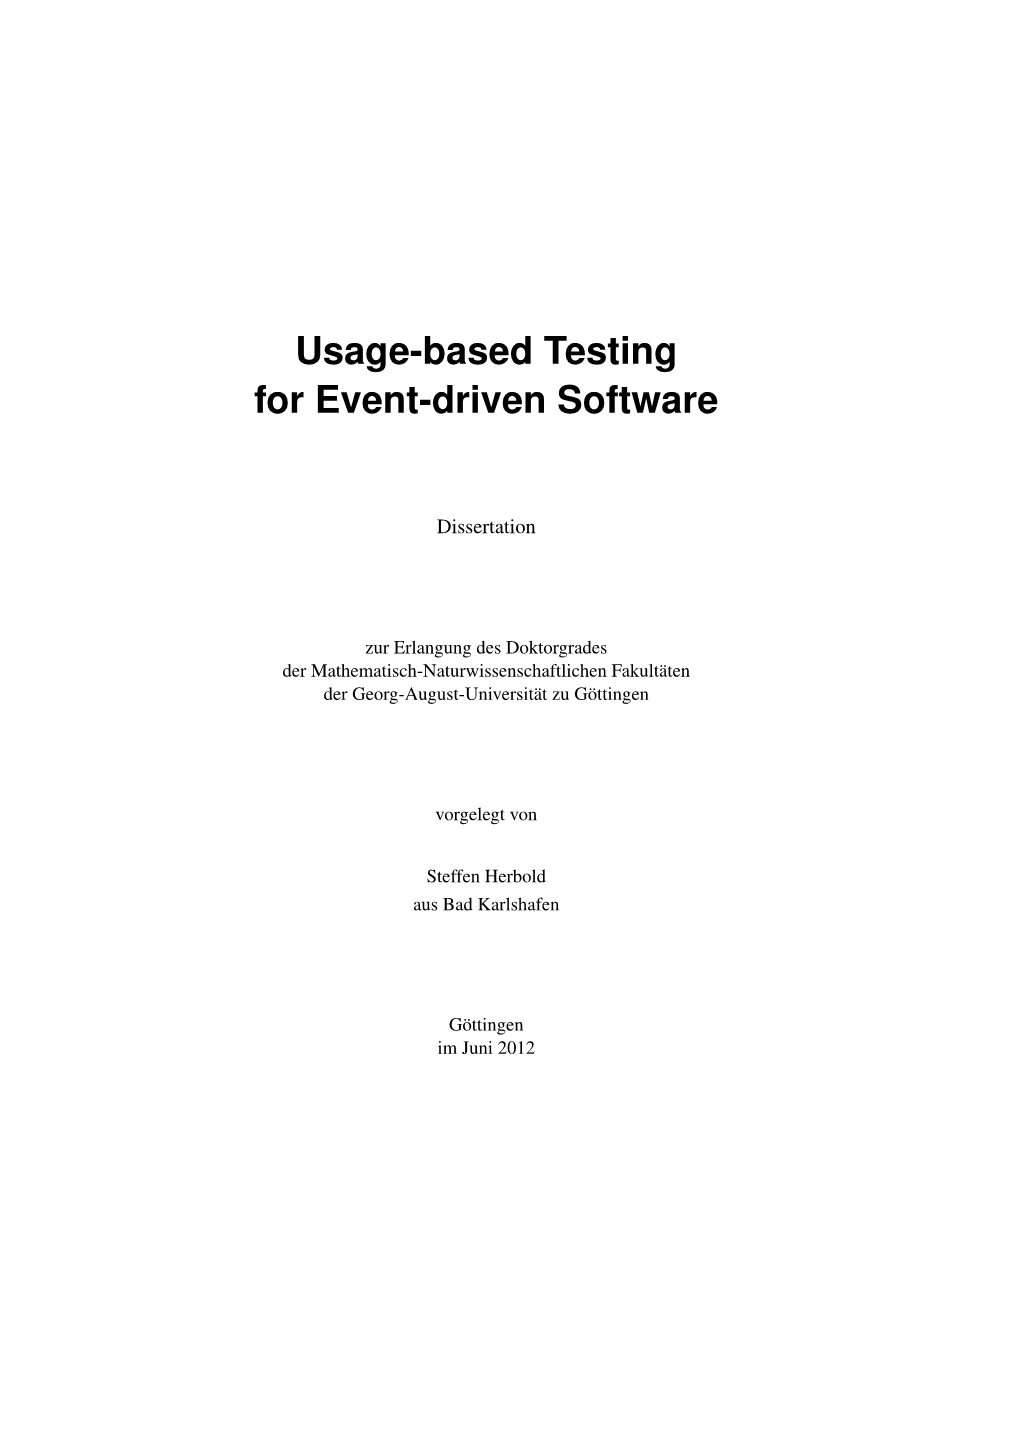 Usage-Based Testing for Event-Driven Software Systems